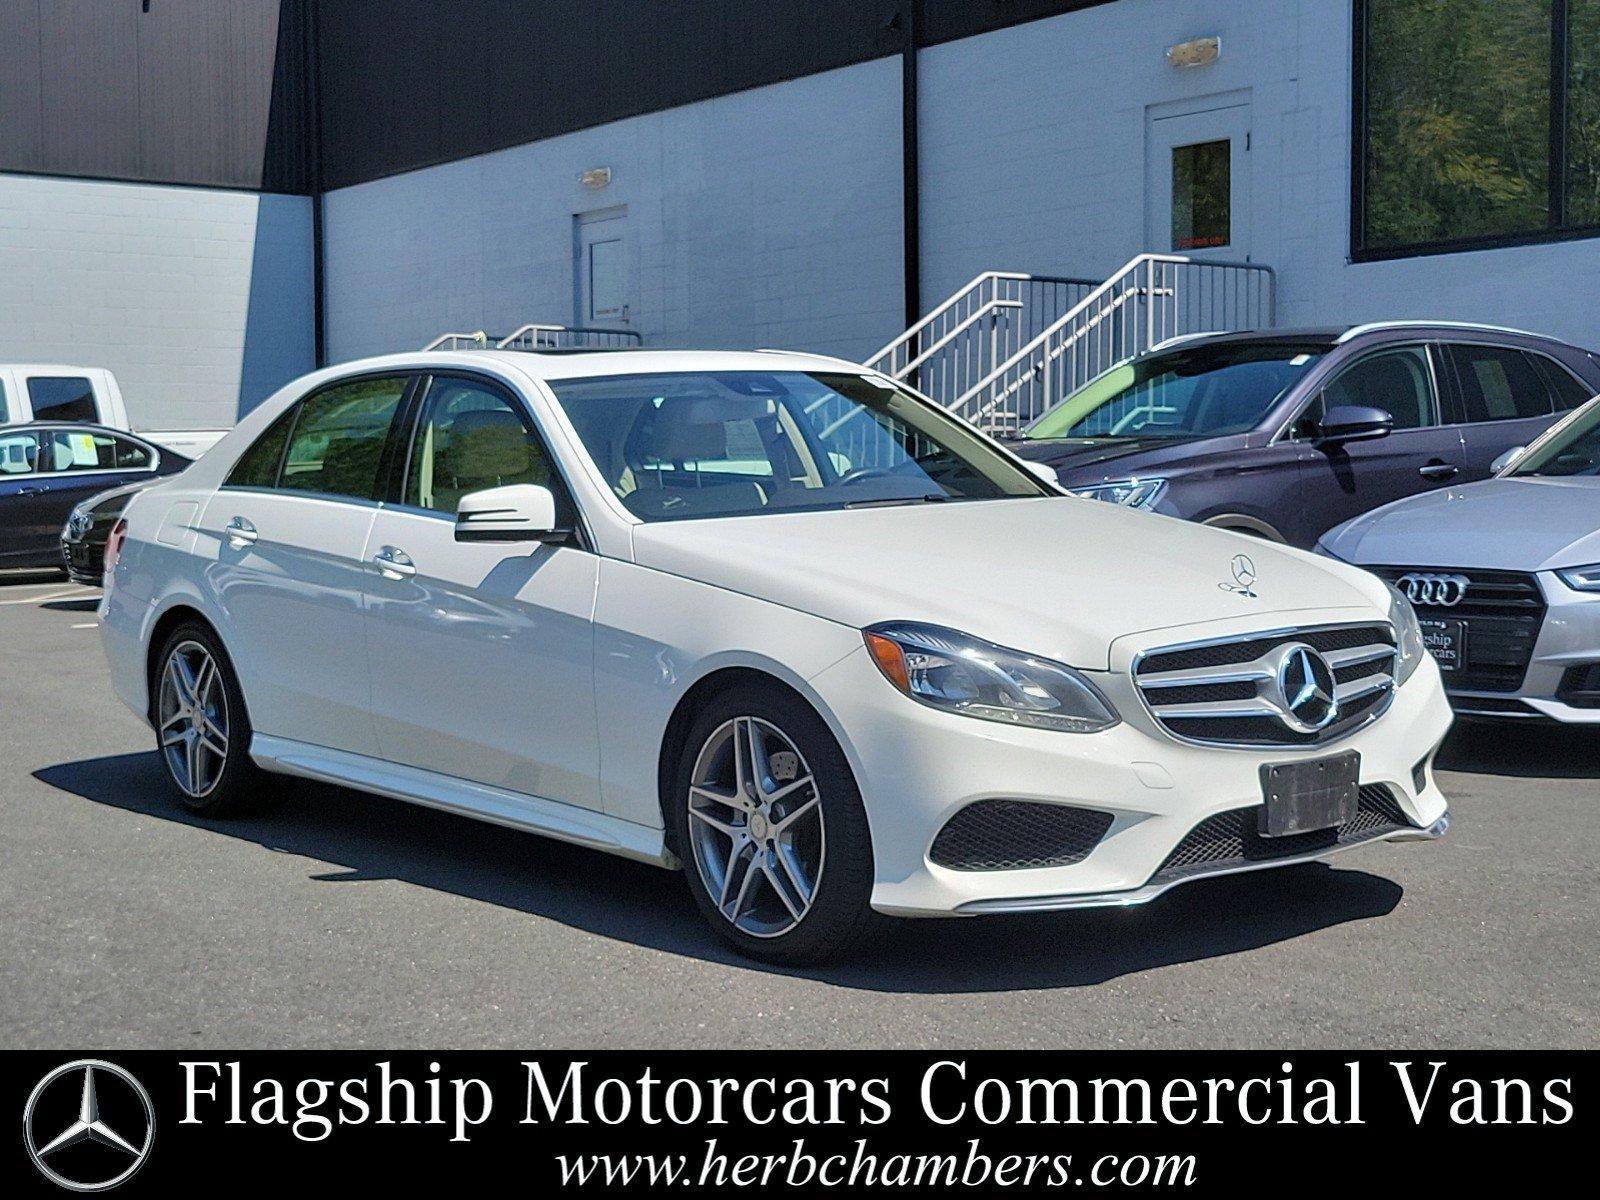 Mercedes-Benz E-Class For Sale Offer in MA